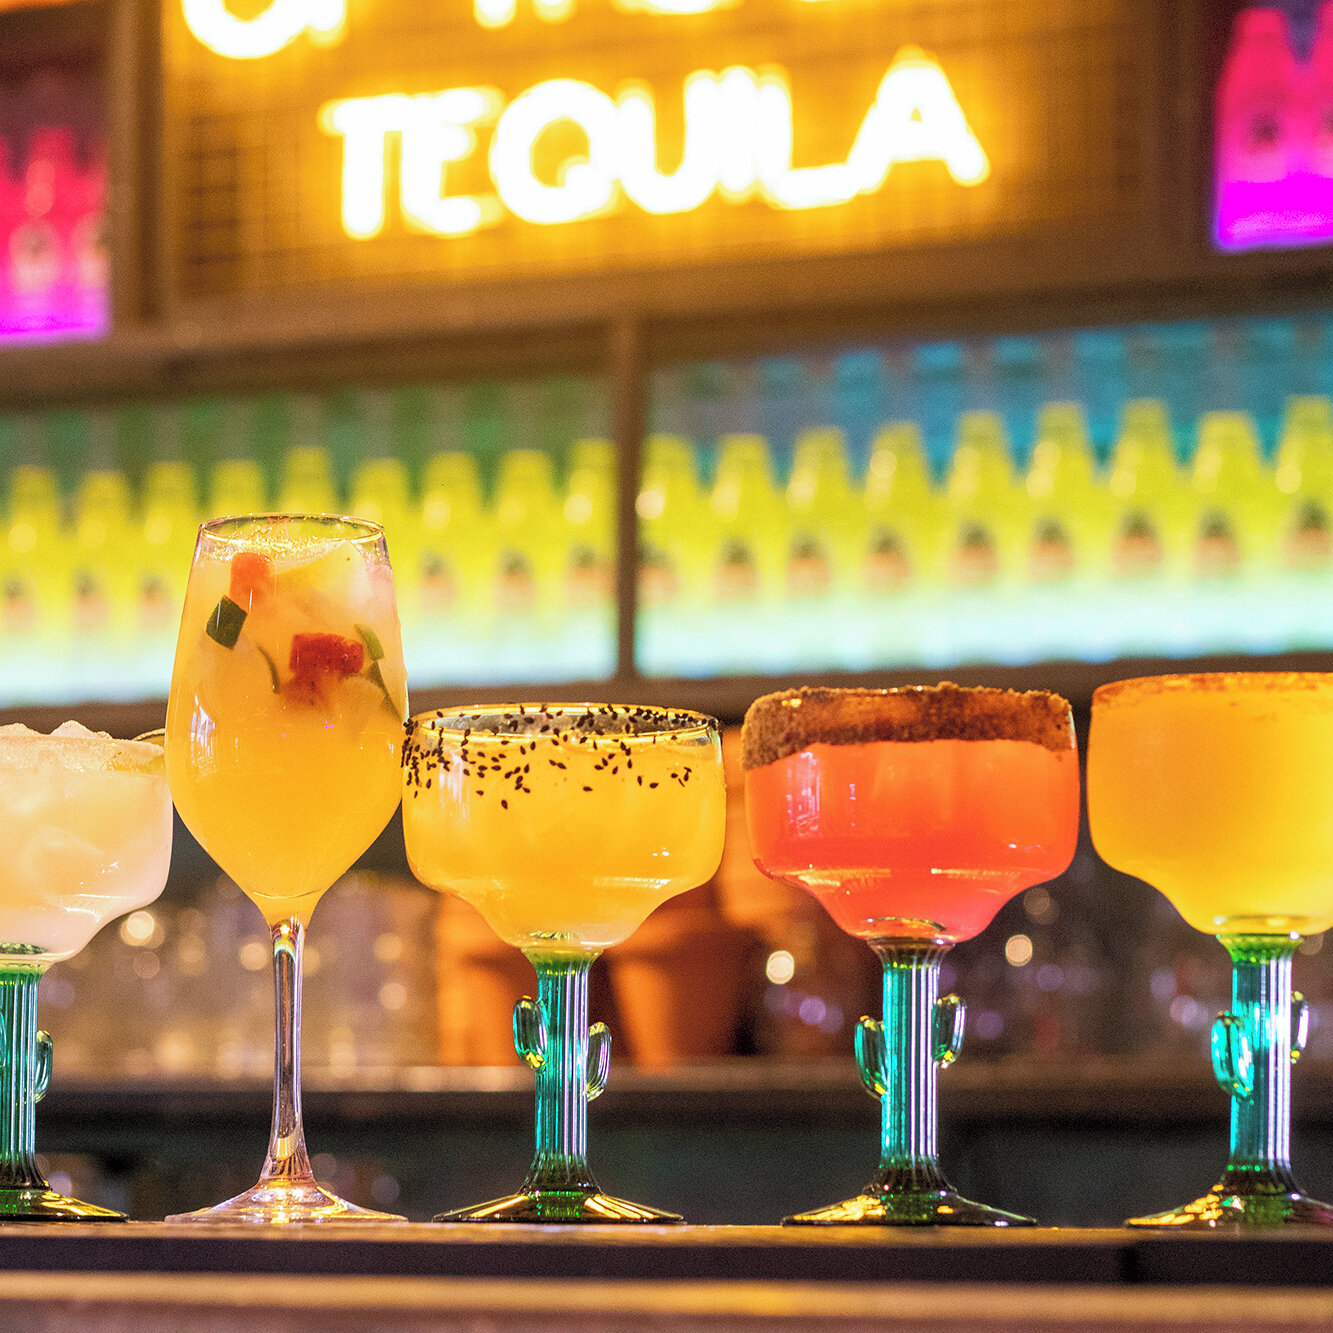 It's time to celebrate the weekend the right way⁣
⁣
With a selection of Mexican infused drinks @elchapostacosdxb 🍹🍸⁣
⁣
#weekend #cocktails